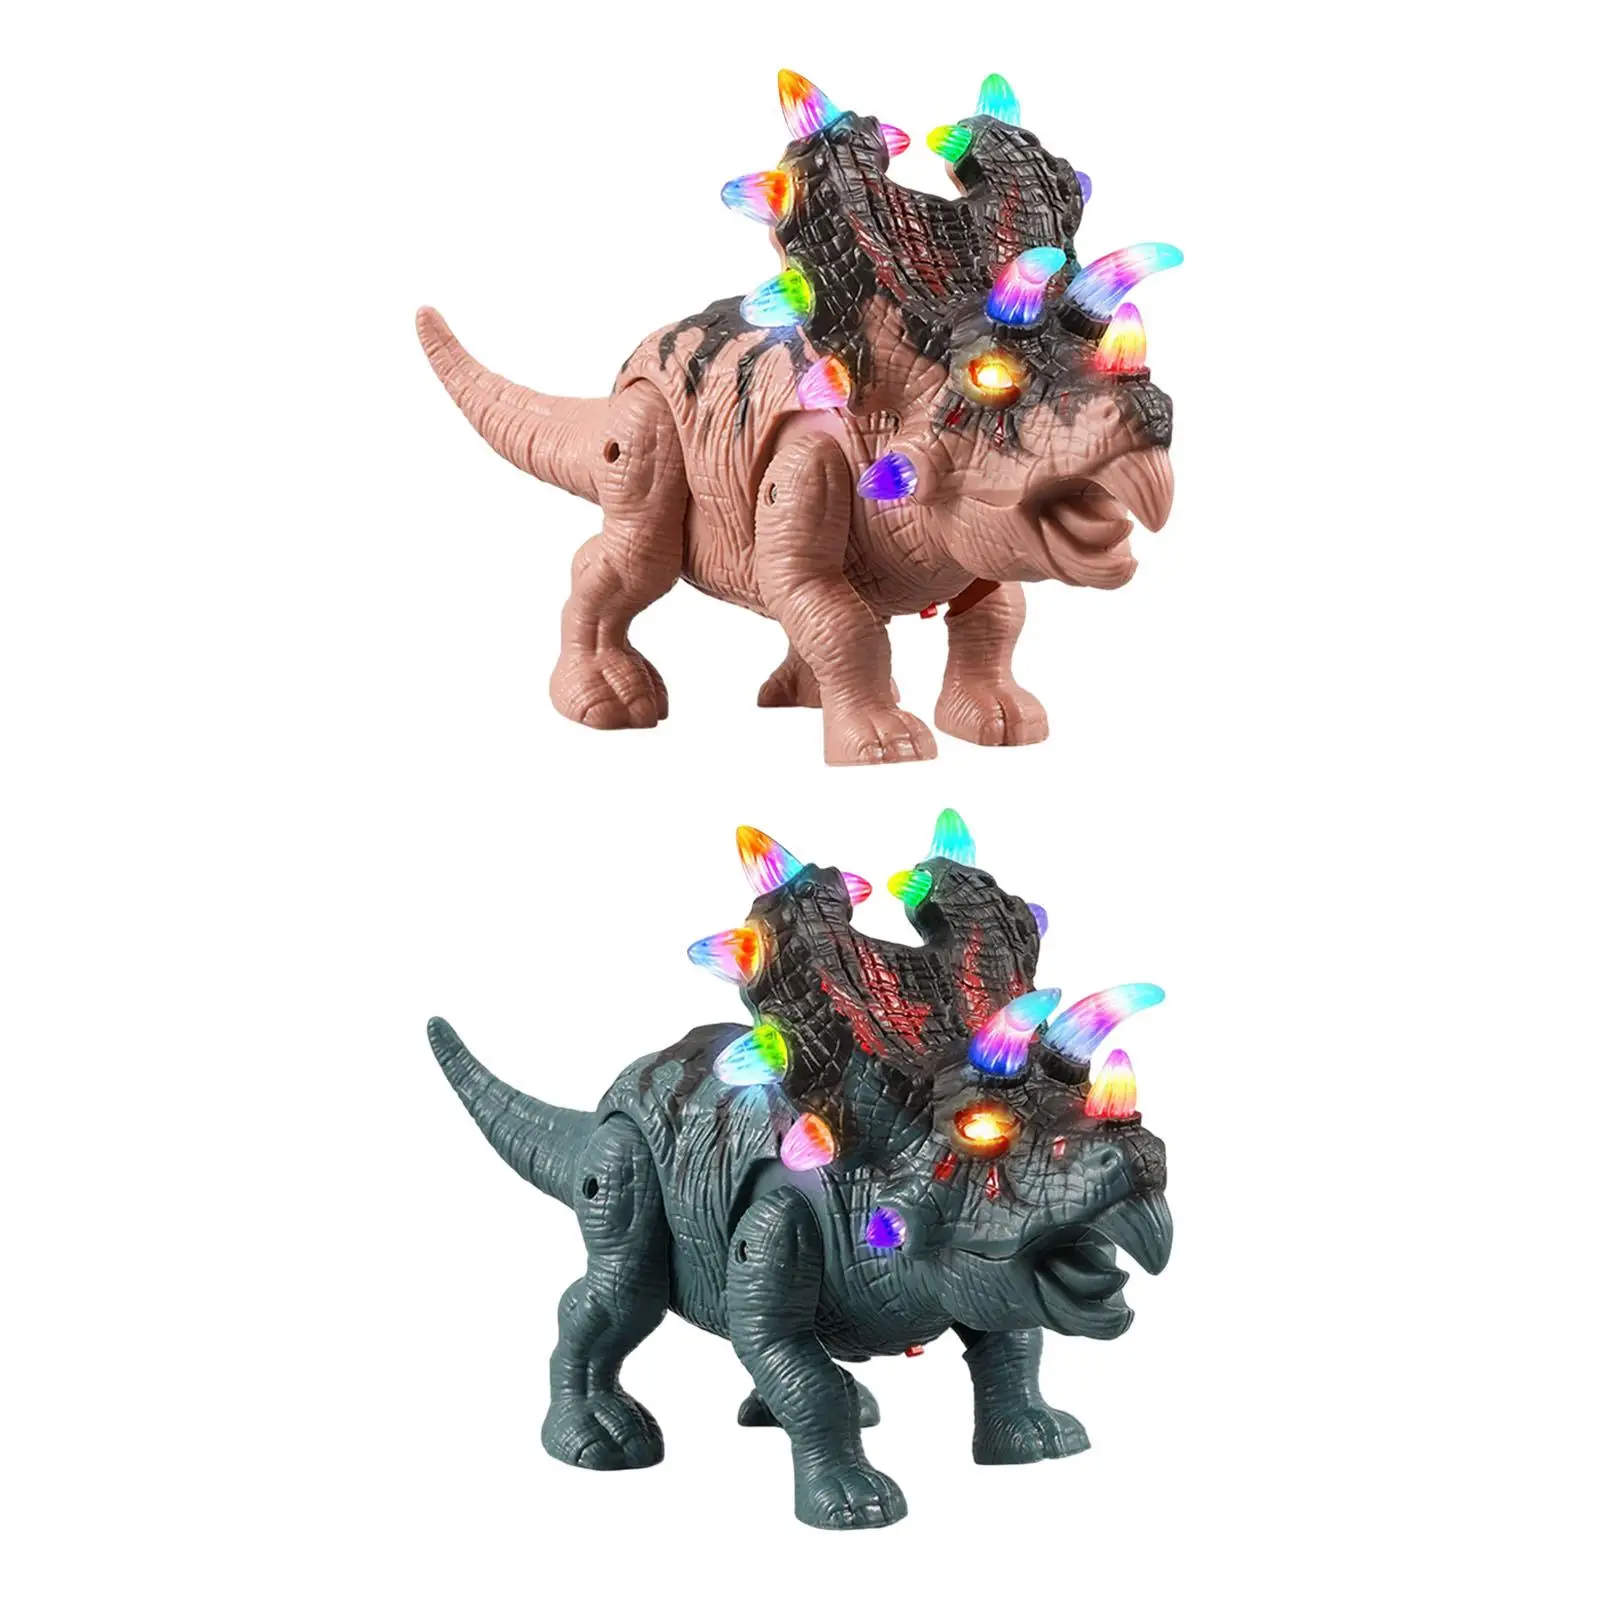 Realistic Electric Dinosaur Toys Action Figure for Kids Boys Birthday Gifts